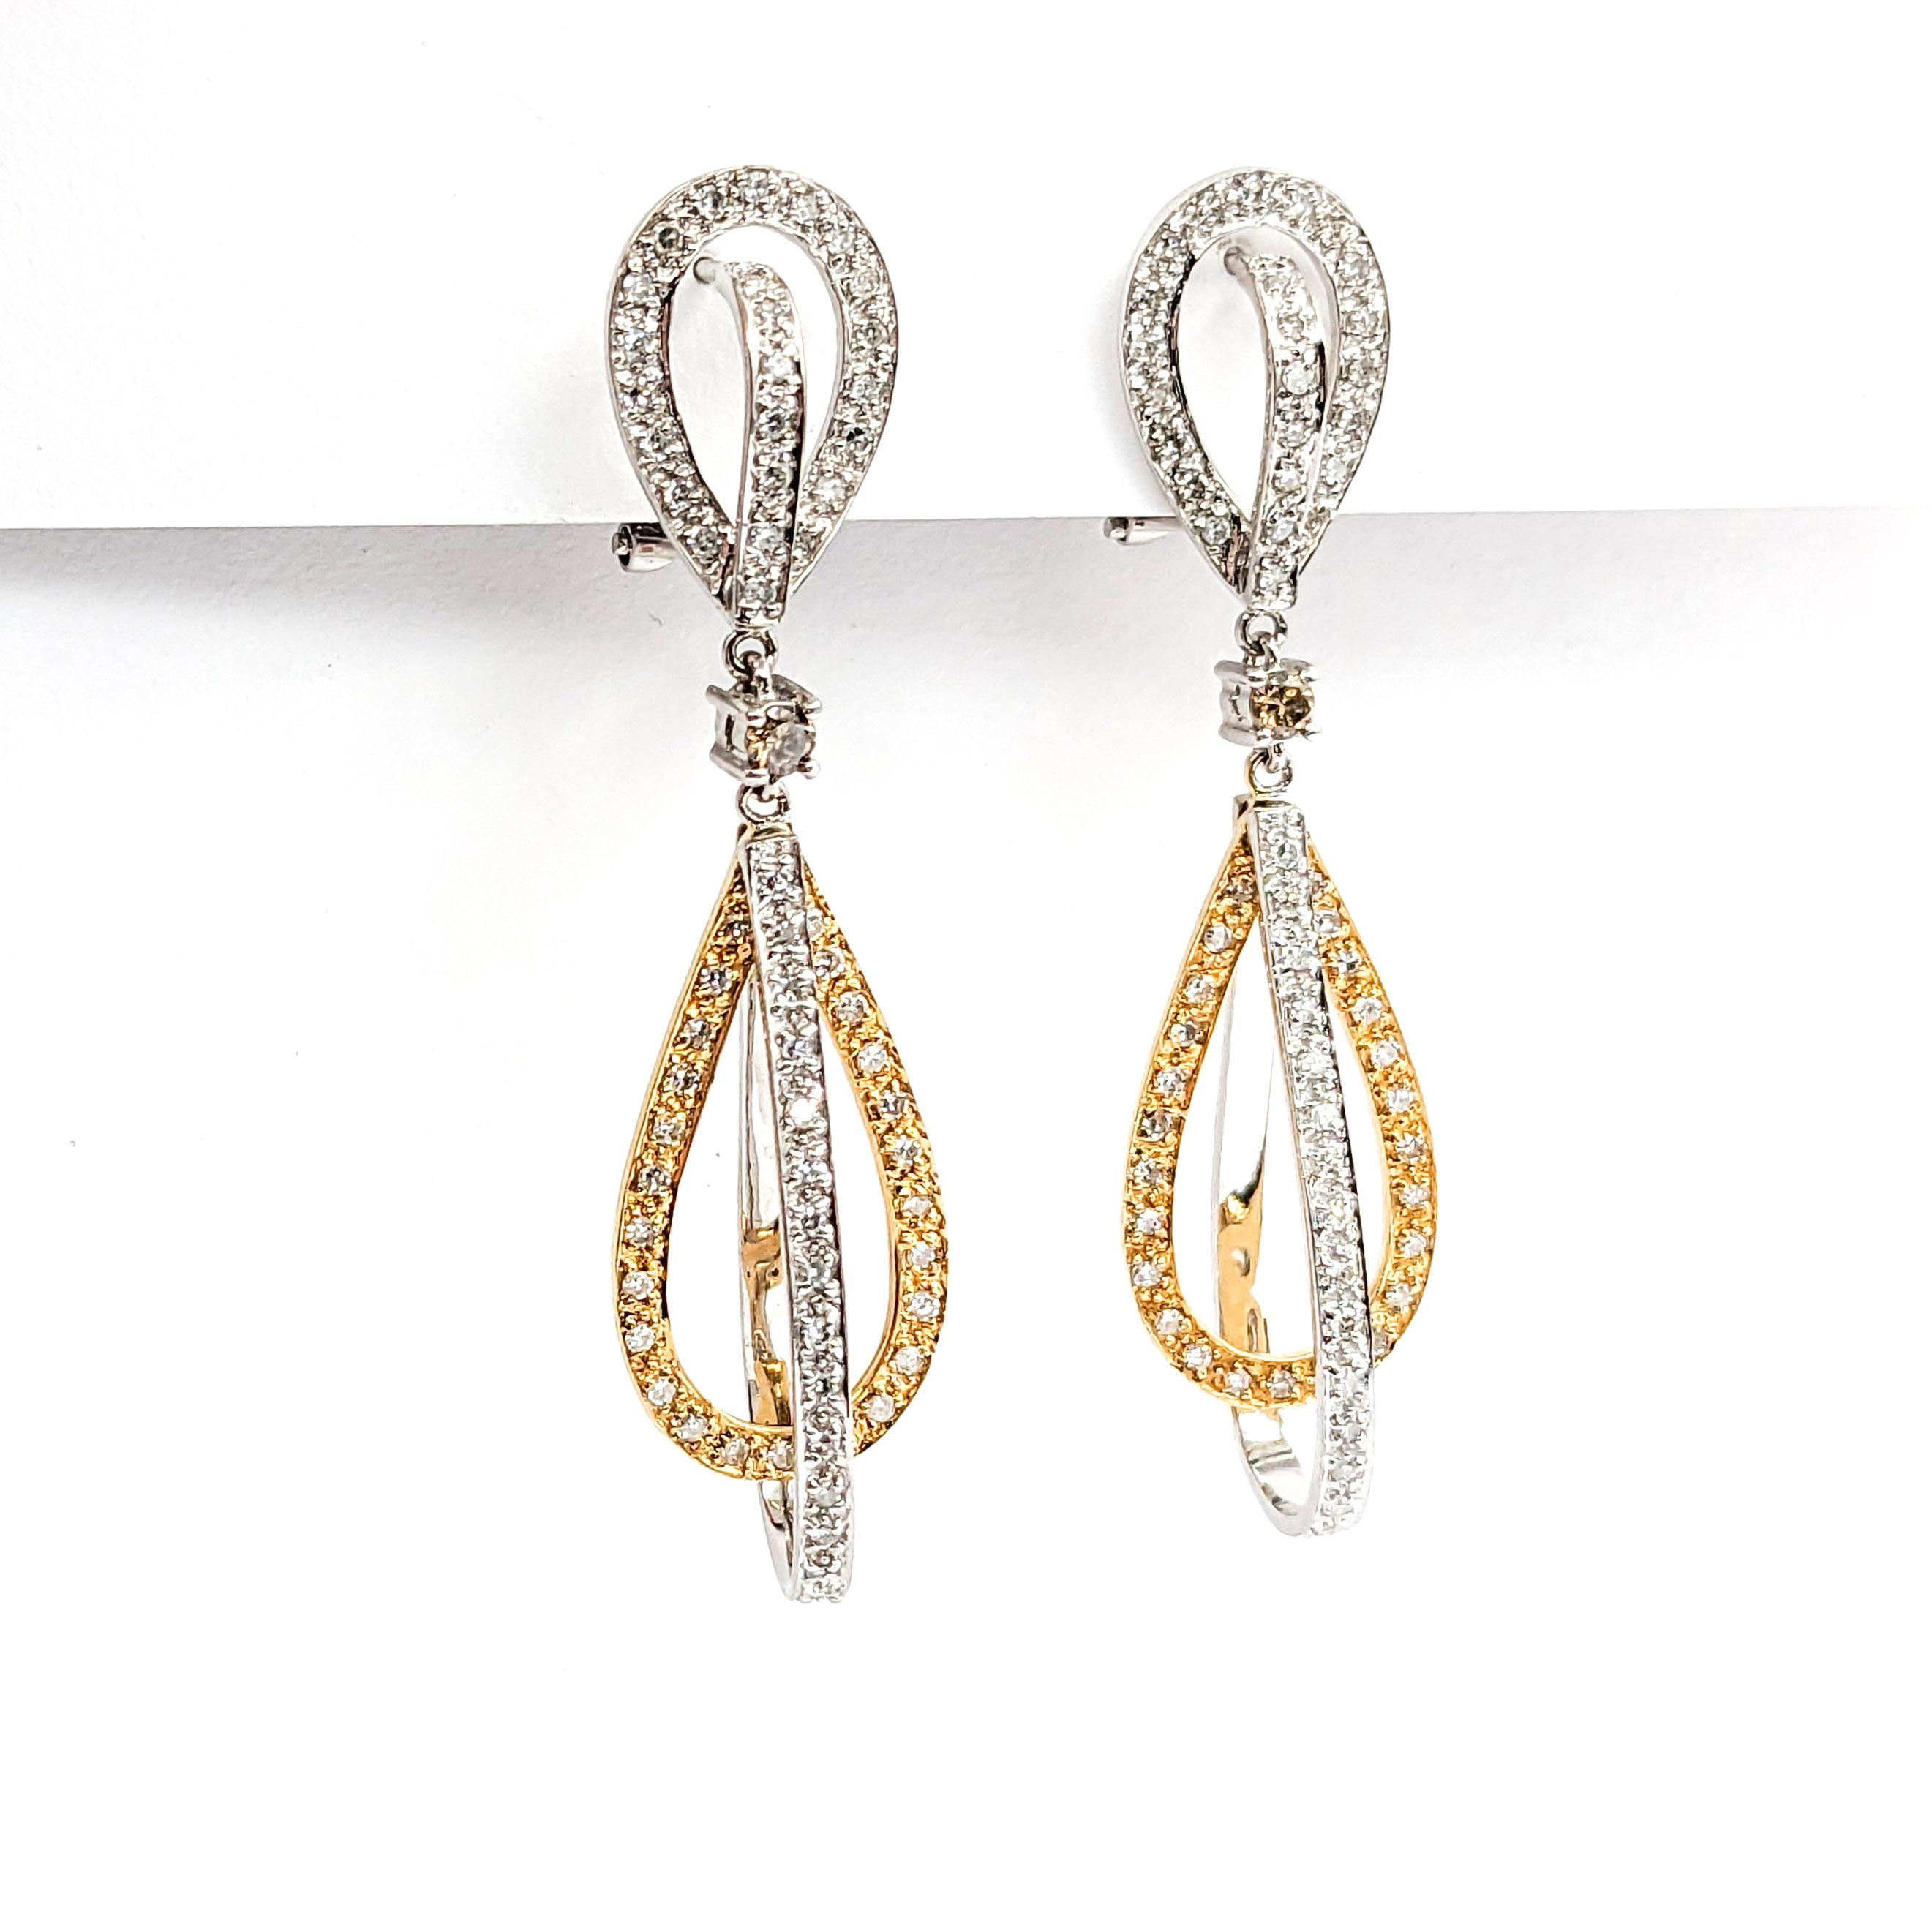 1.ctw Diamond Jackets Earrings In White Gold

Introducing these stunning Diamond Fashion Earring Jackets, exquisitely crafted in 14kt white gold. These elegant accessories feature 1.00ctw of diamonds that display a radiant sparkle, thanks to their